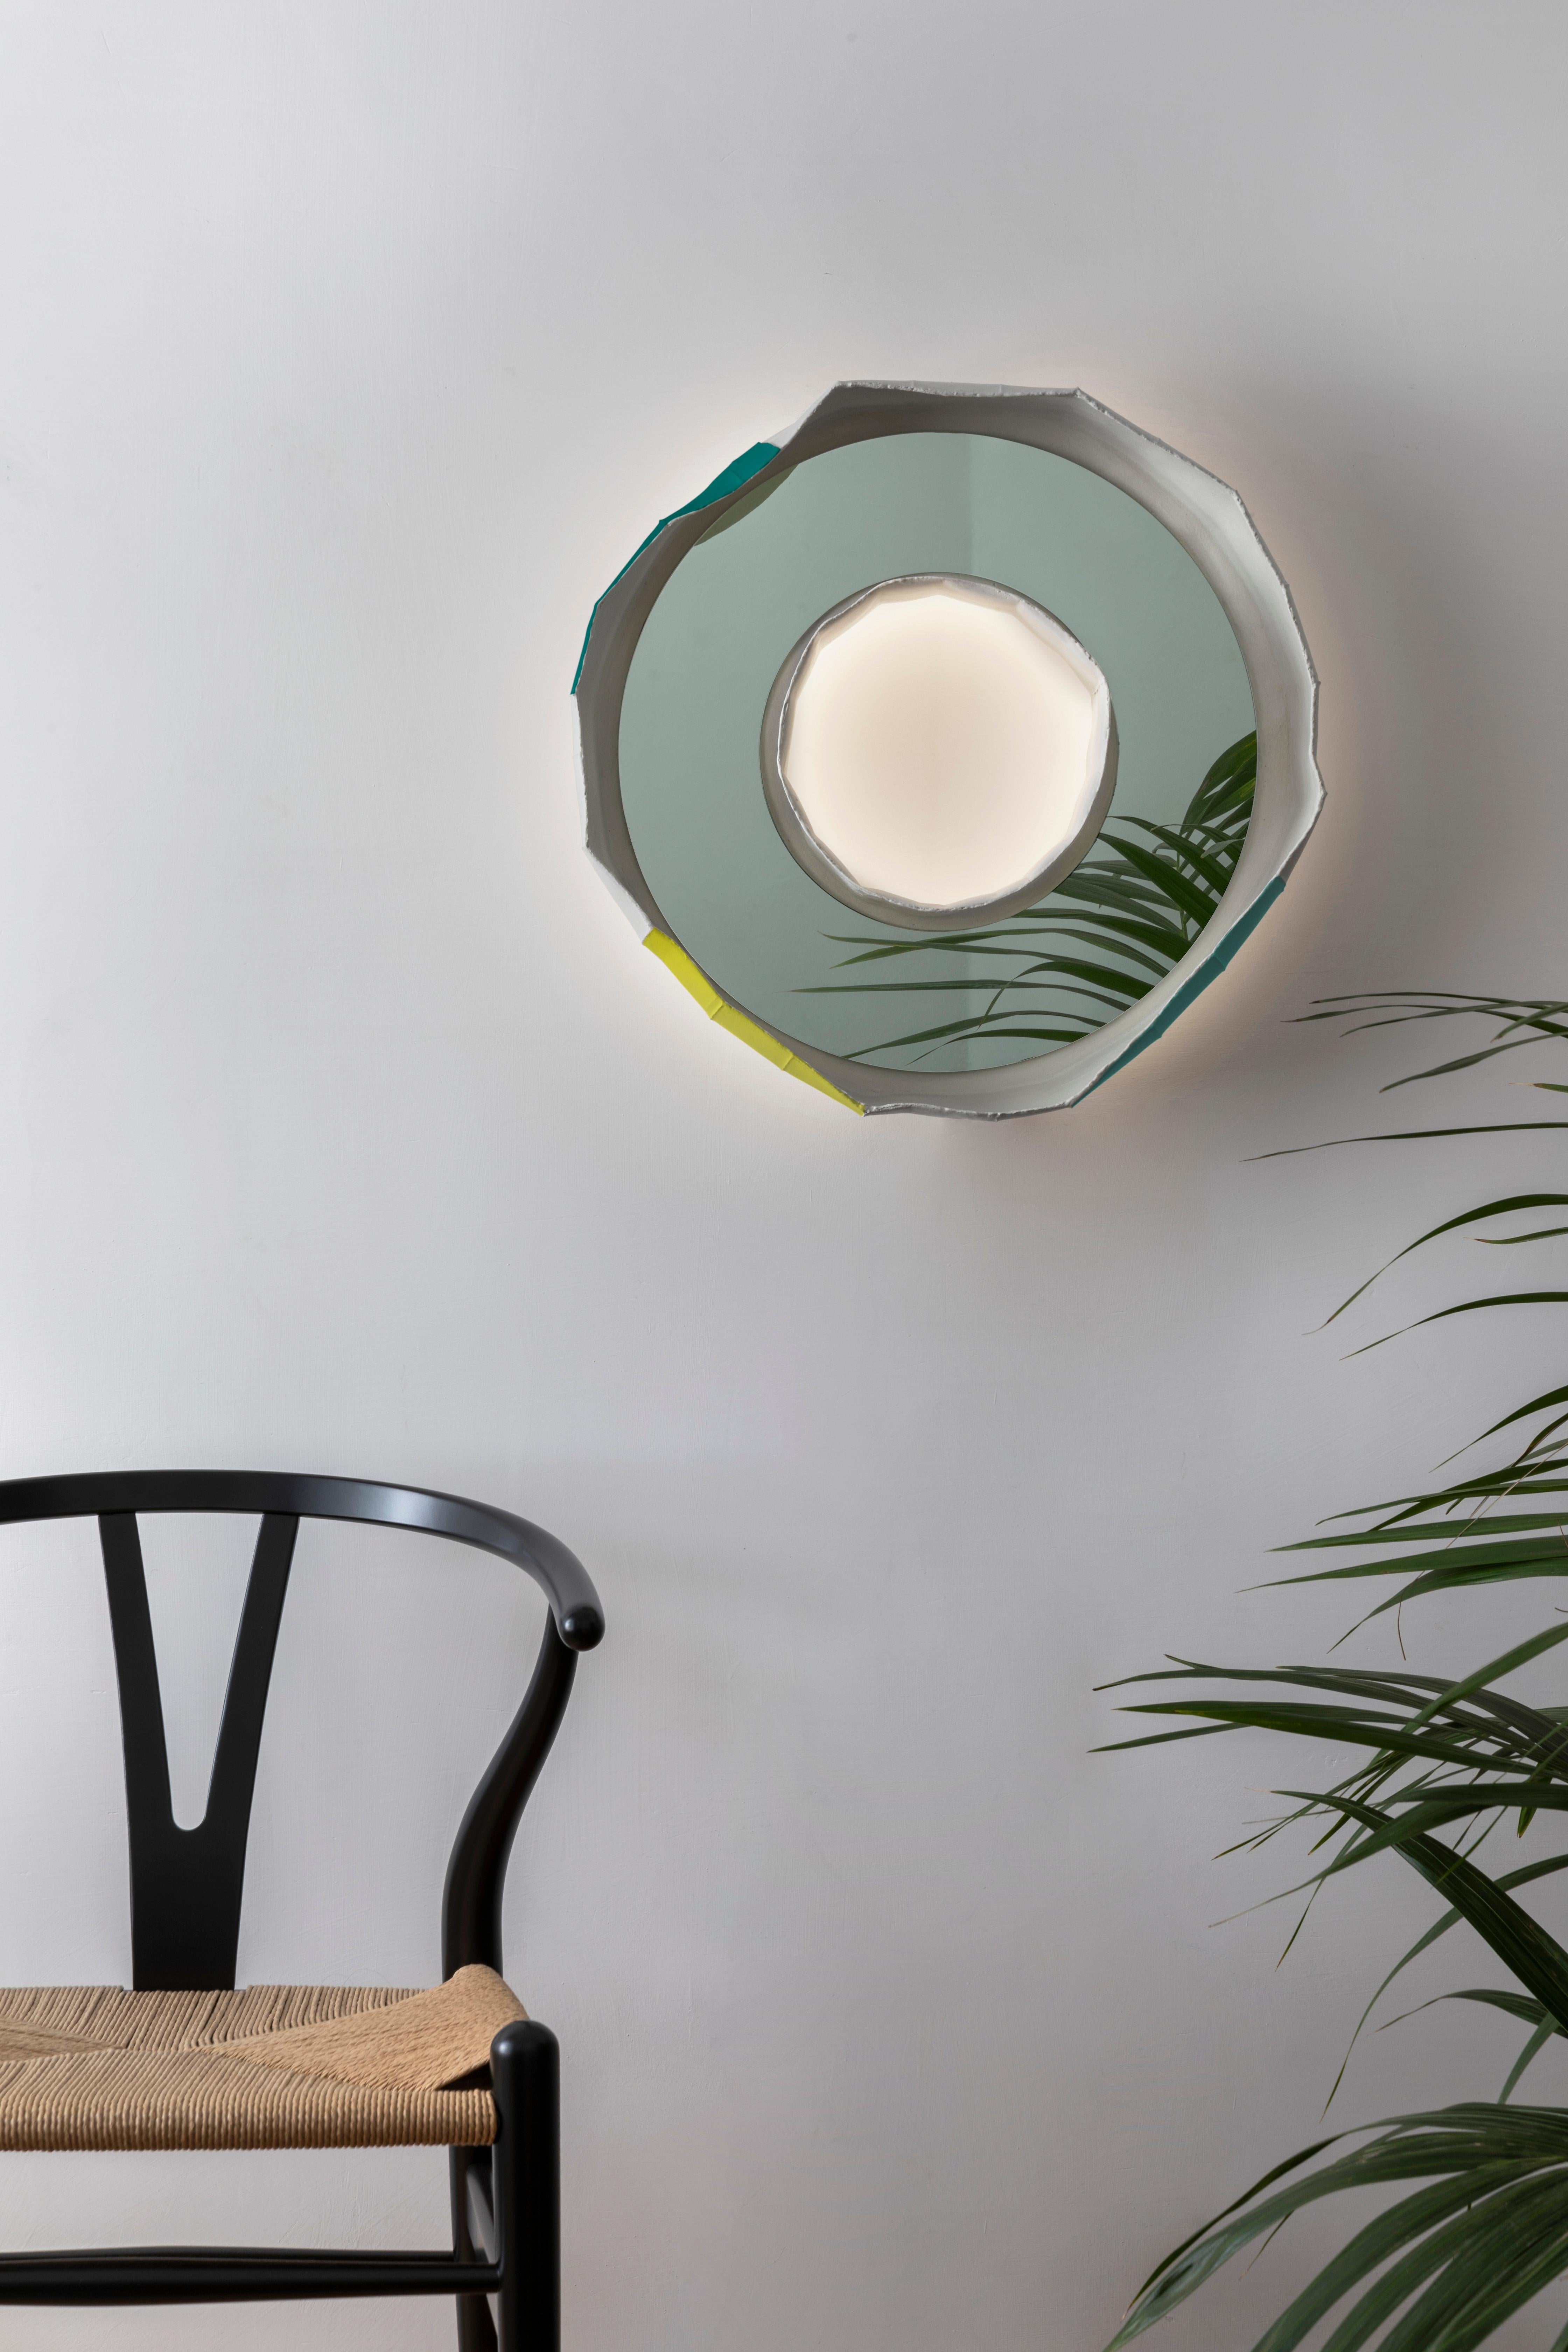 RING AURA, a stunning mirror-lamp handmade in Italy, one of 2 designs that make up the collection REFLECTIONS, the result of a collaboration between artist Paola Paronetto & designer Giovanni Botticelli, that integrates ceramic with colour, glass